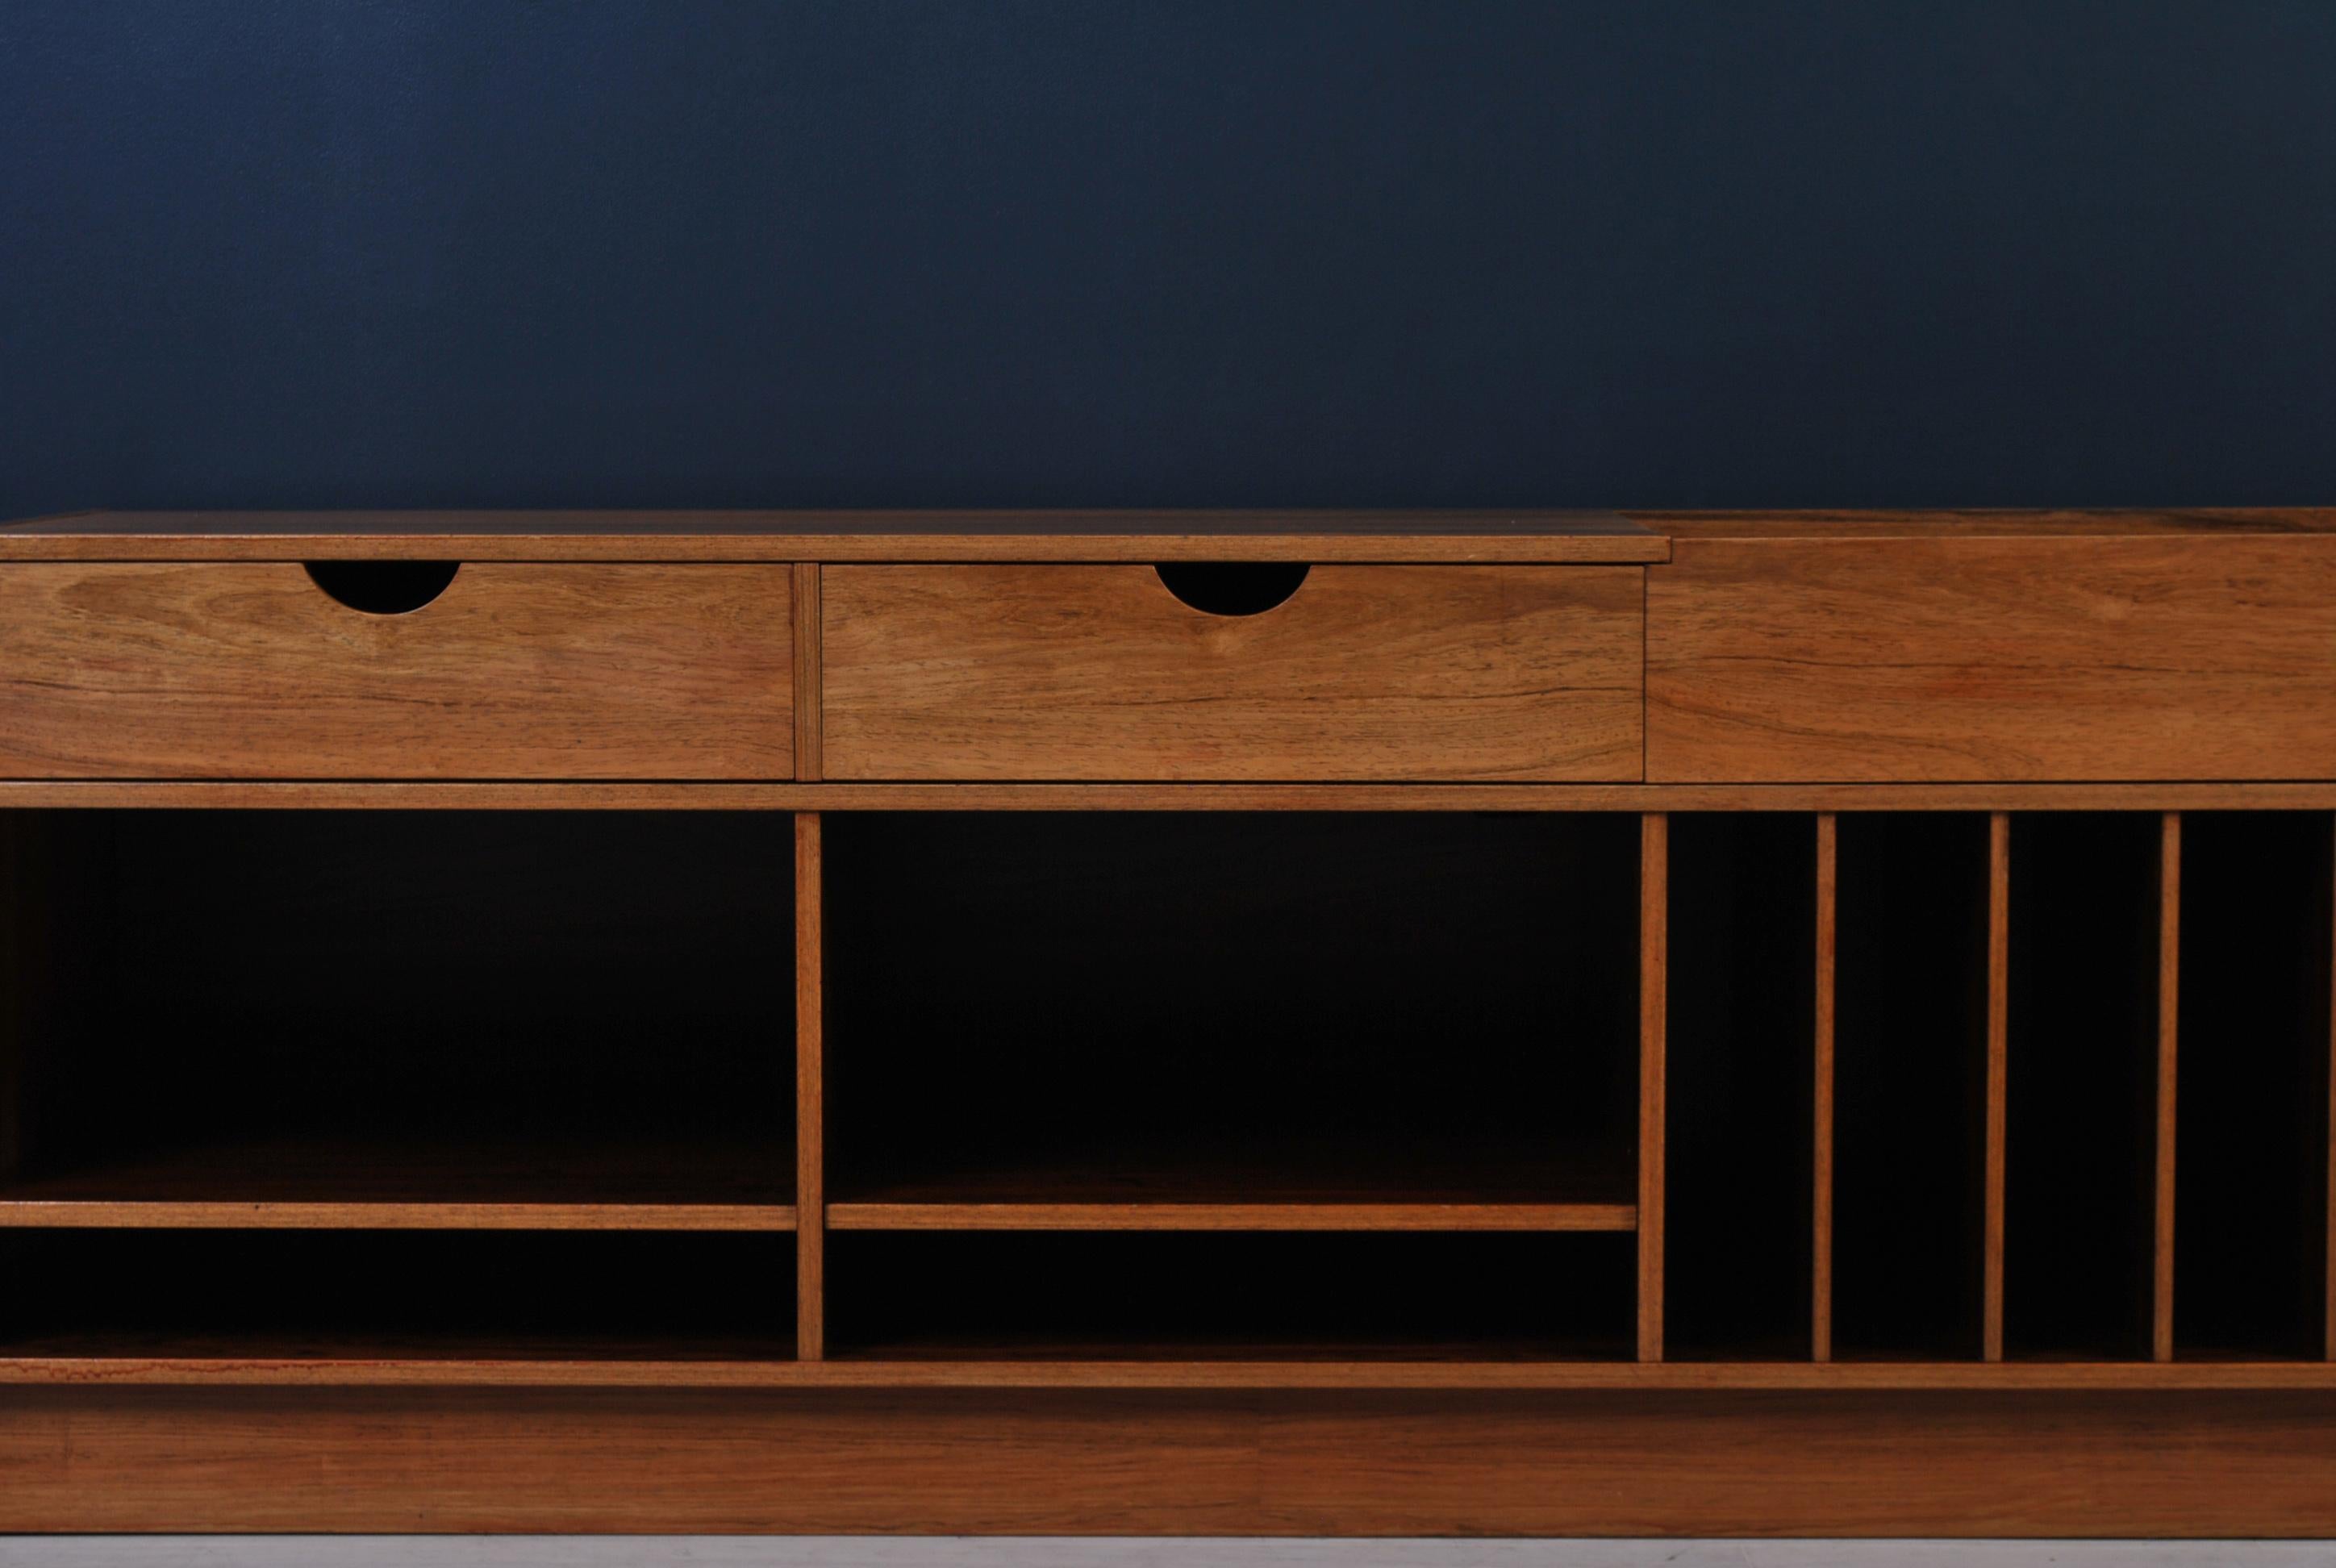 An expanding audio unit - sideboard. Vinyl storage. Very unusual. 1960’s Sweden. Extends to fit your wall space or requirements. Adjustable shelves.

Measures: 160cm extending to 260cm. D50 x H62cm.